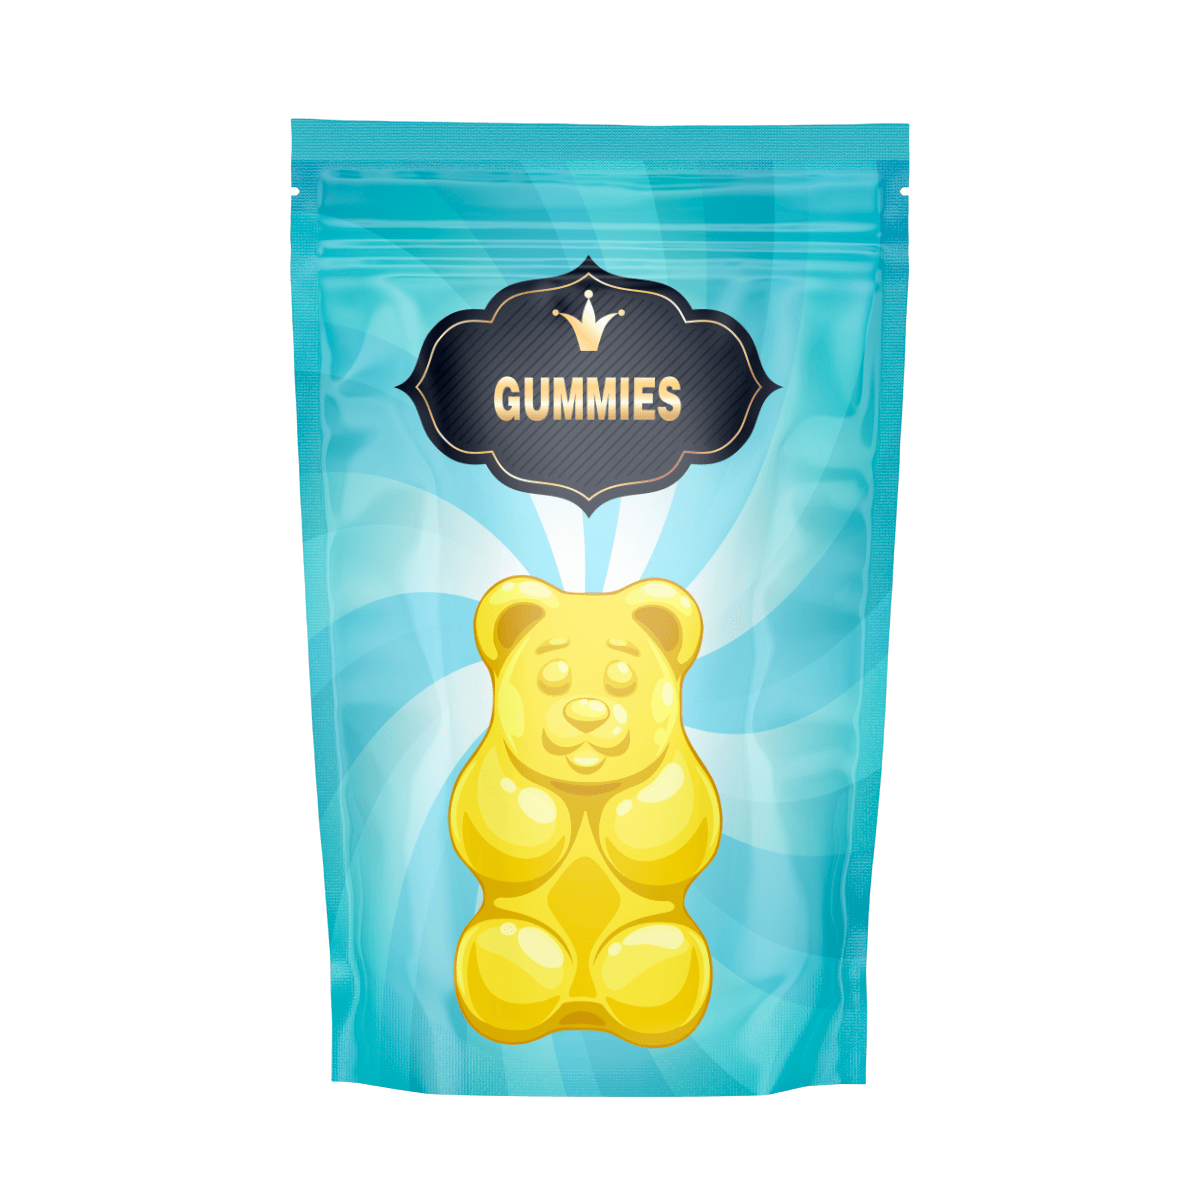 Pouch With Gummy Bears in side2 Gummy Packaging